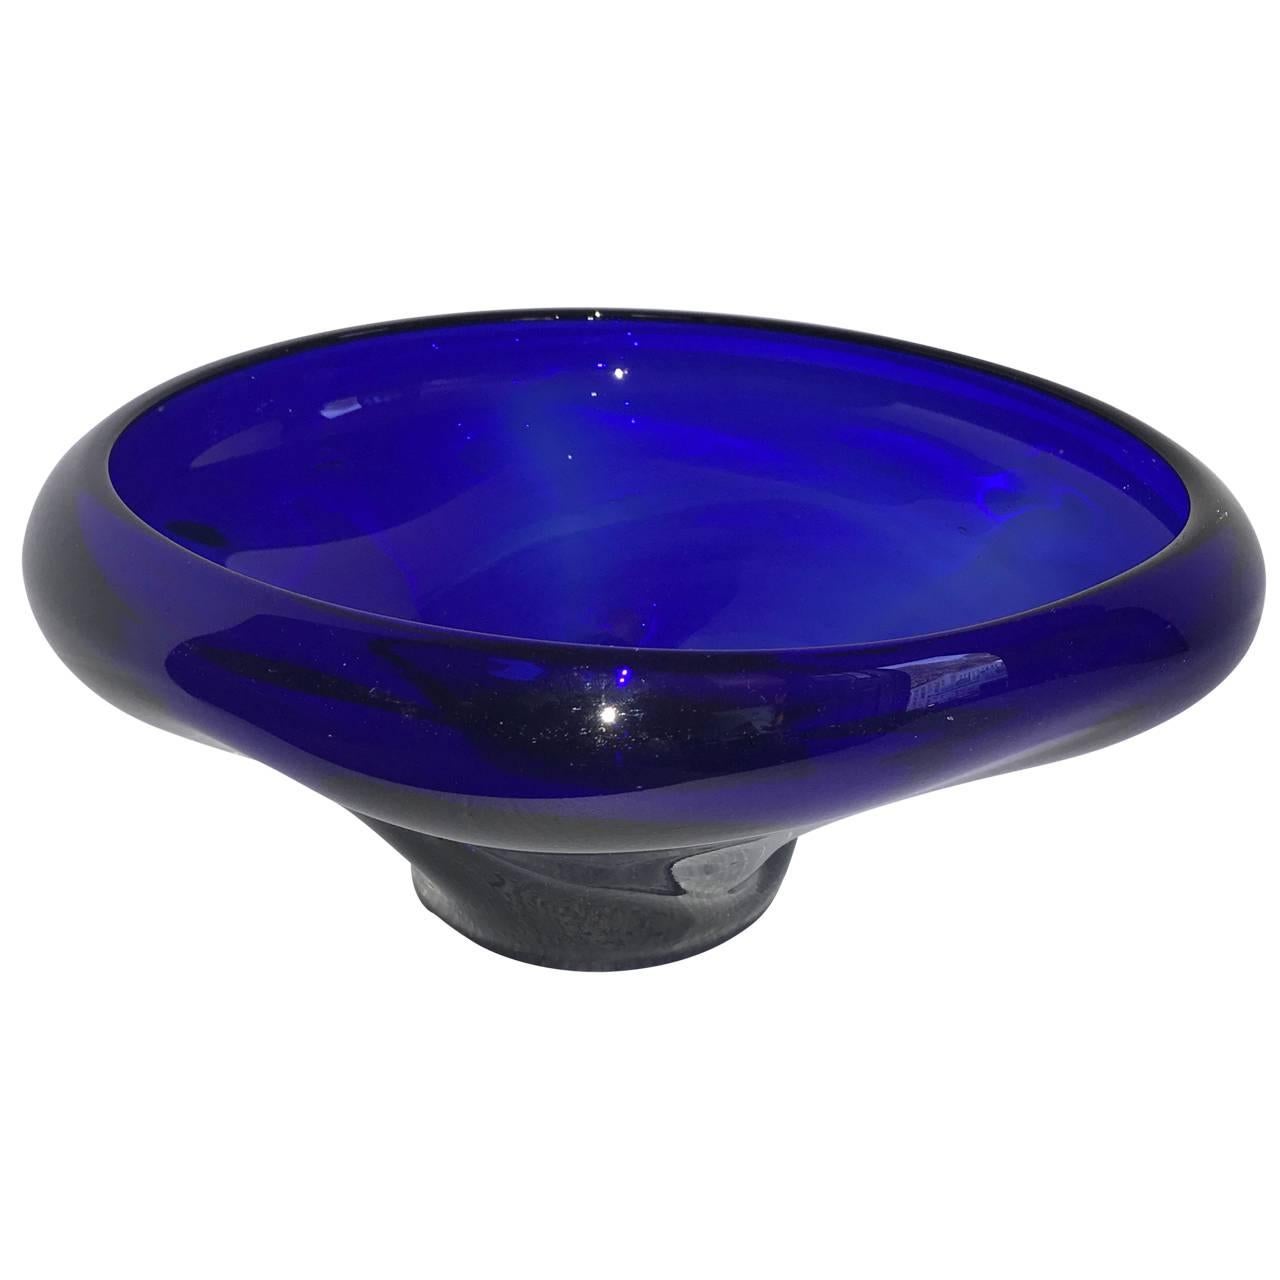 Centerpiece of glass in deep cobalt blue bowl, organic in form and shape. Bowl rests on a cobalt blue base, potentially not original to the top, see detailed images.
Great wear to bottom of bowl.